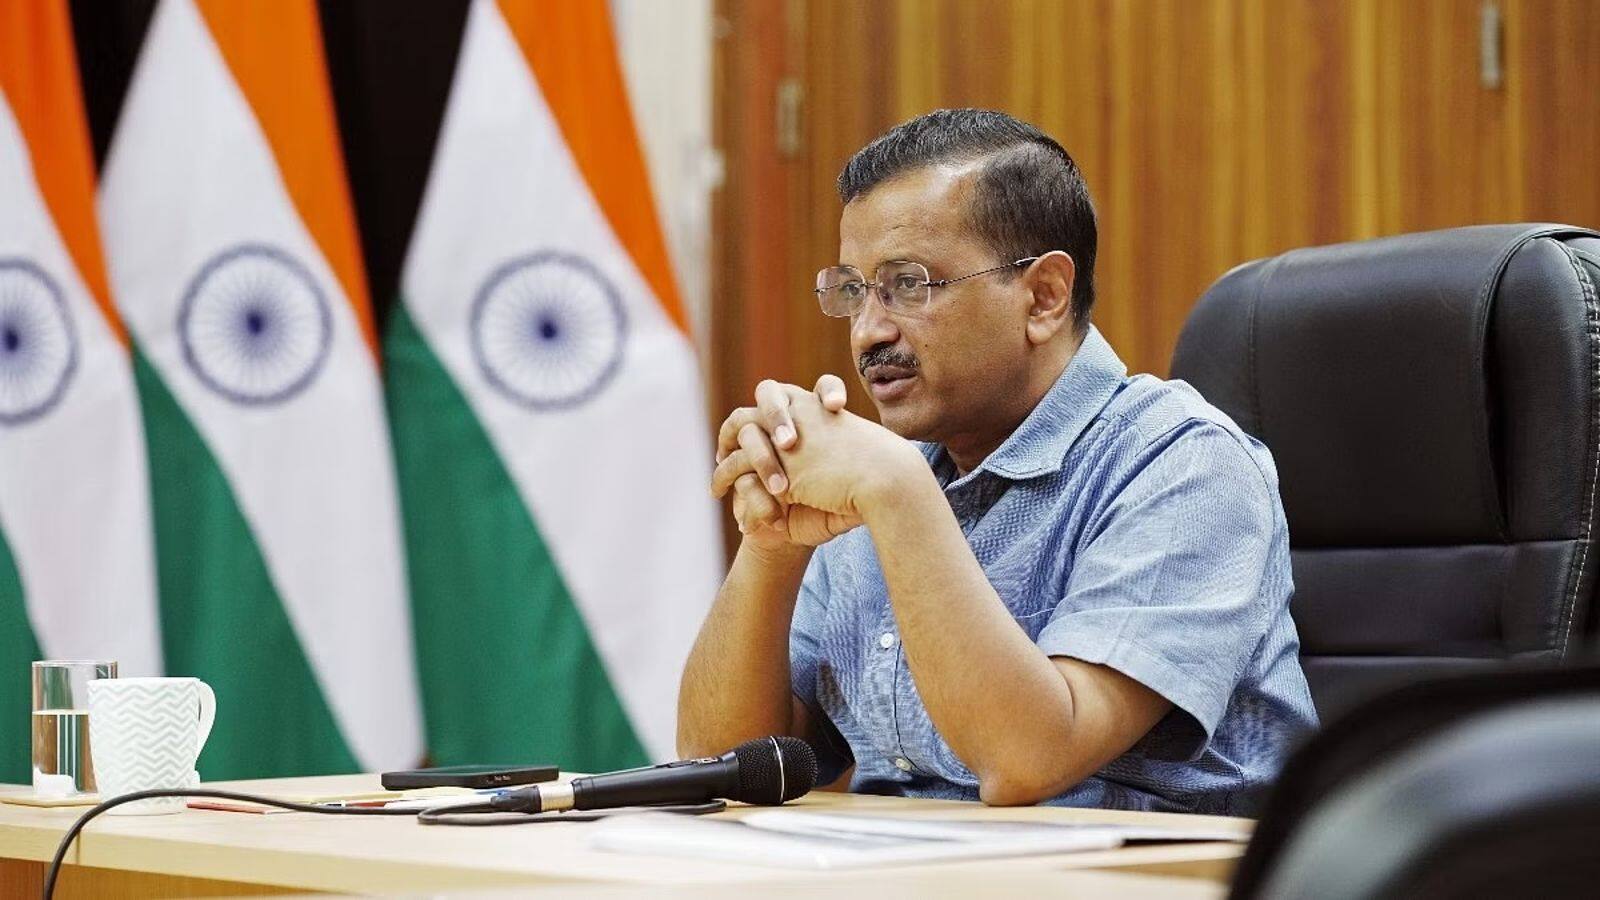 Kejriwal's health deteriorating in ED custody: Chief minister's office